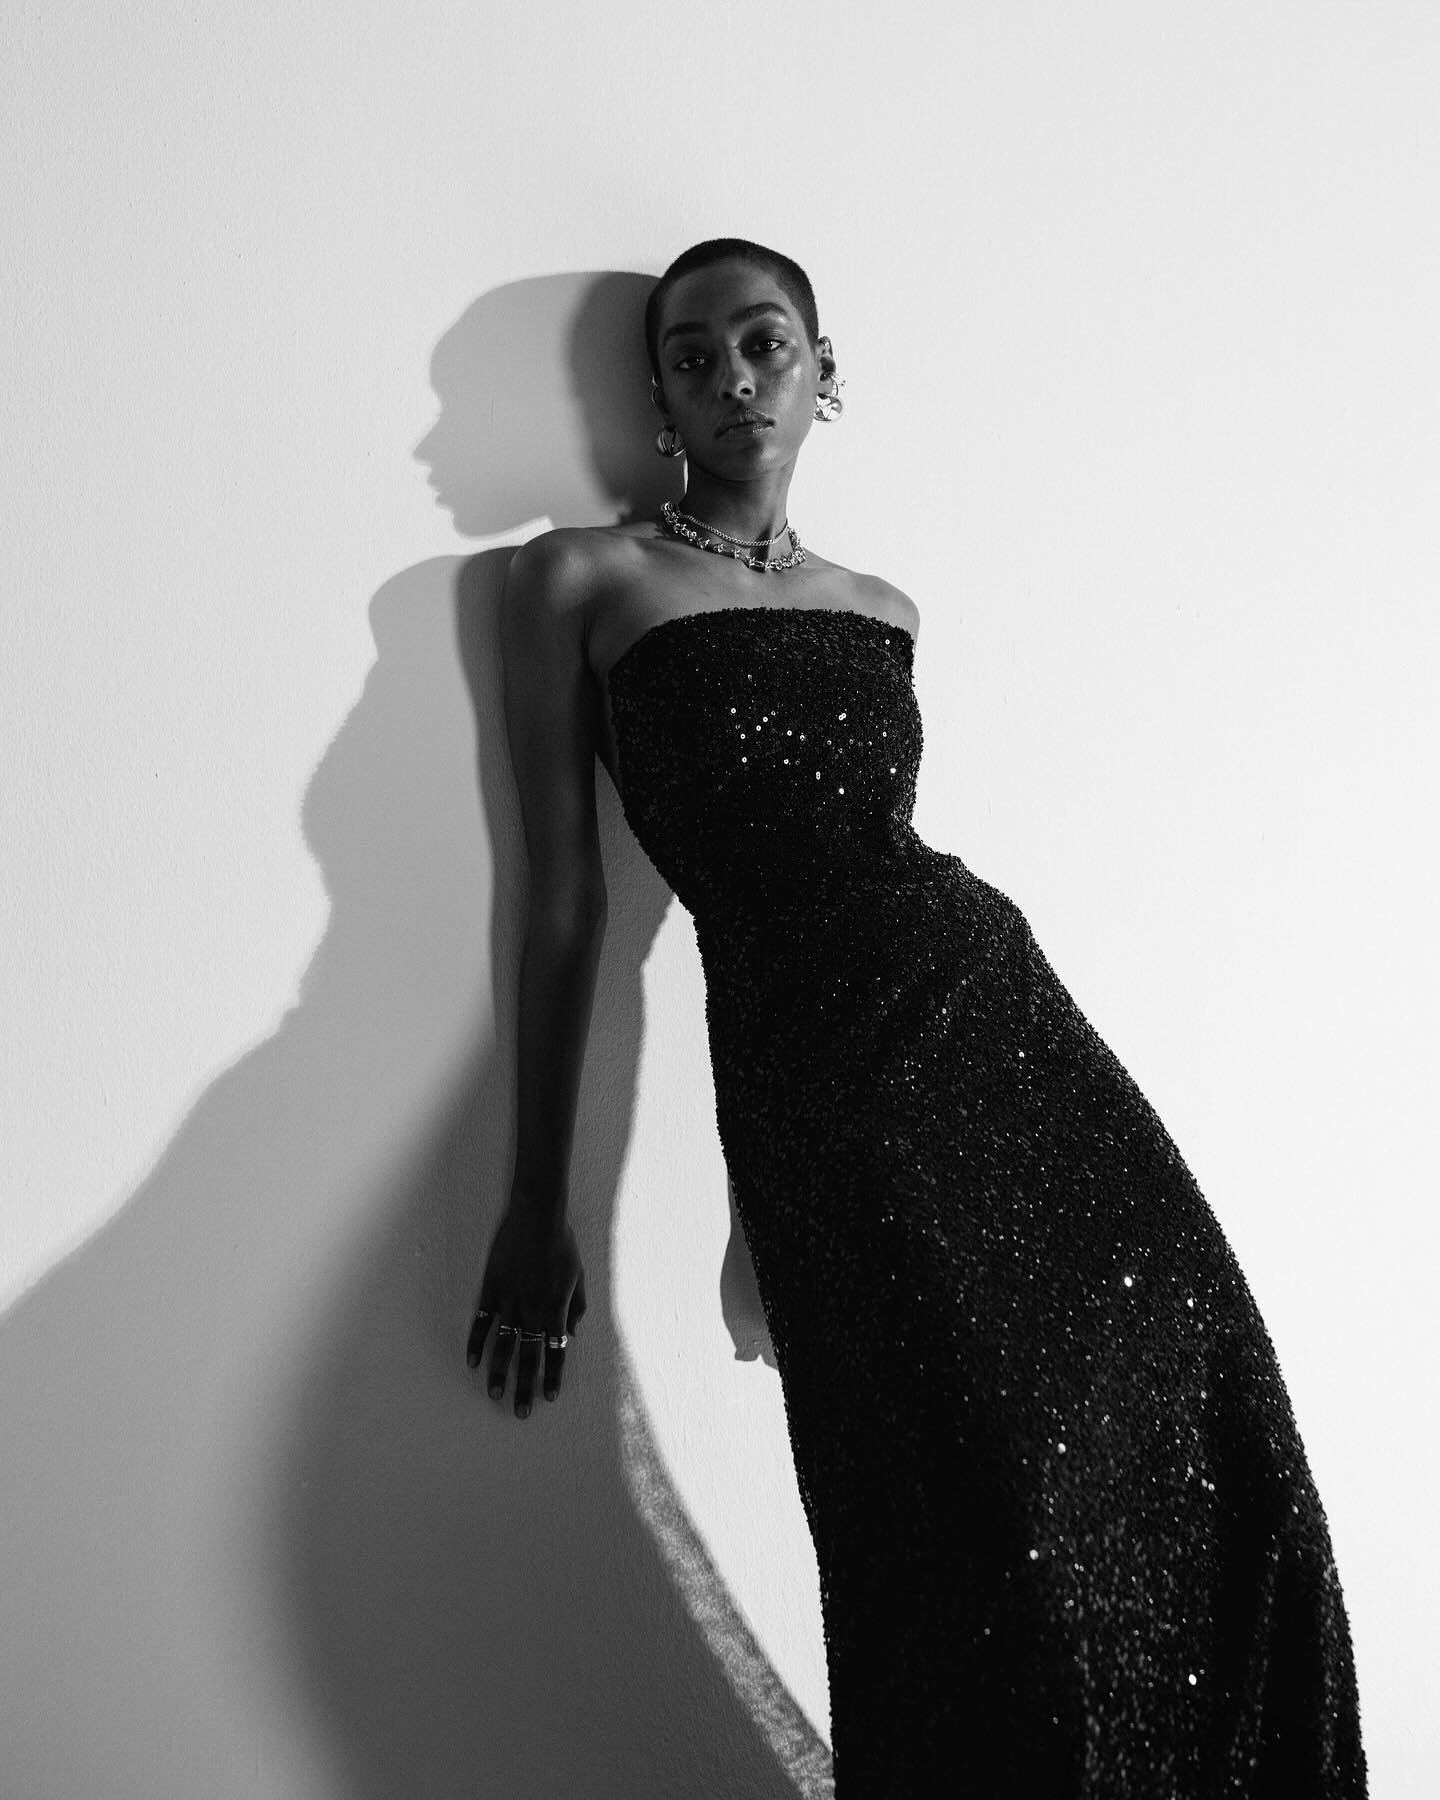 E C L I P S E

Love. My way. It&rsquo;s a new road.

Sustainably handmade couture from Berlin, Germany. Book your appointment via www.ritual-unions.com | made-to-measure

 
#couture #berlincouture #berlinfashion #beadedgown #blackgown #eveningwear #e